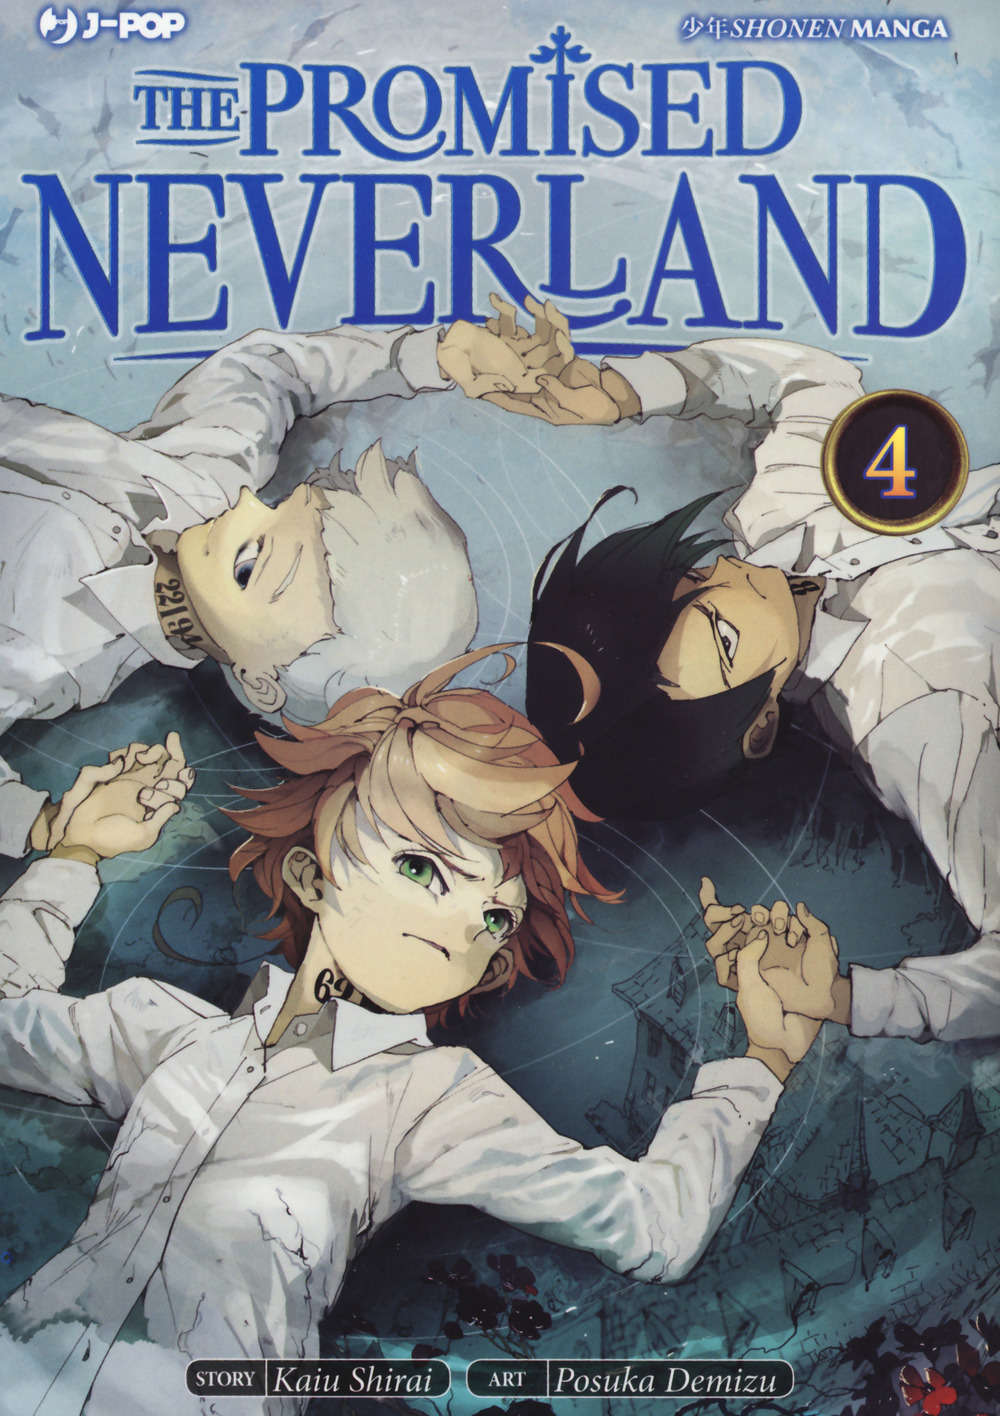 The promised Neverland. Vol. 4